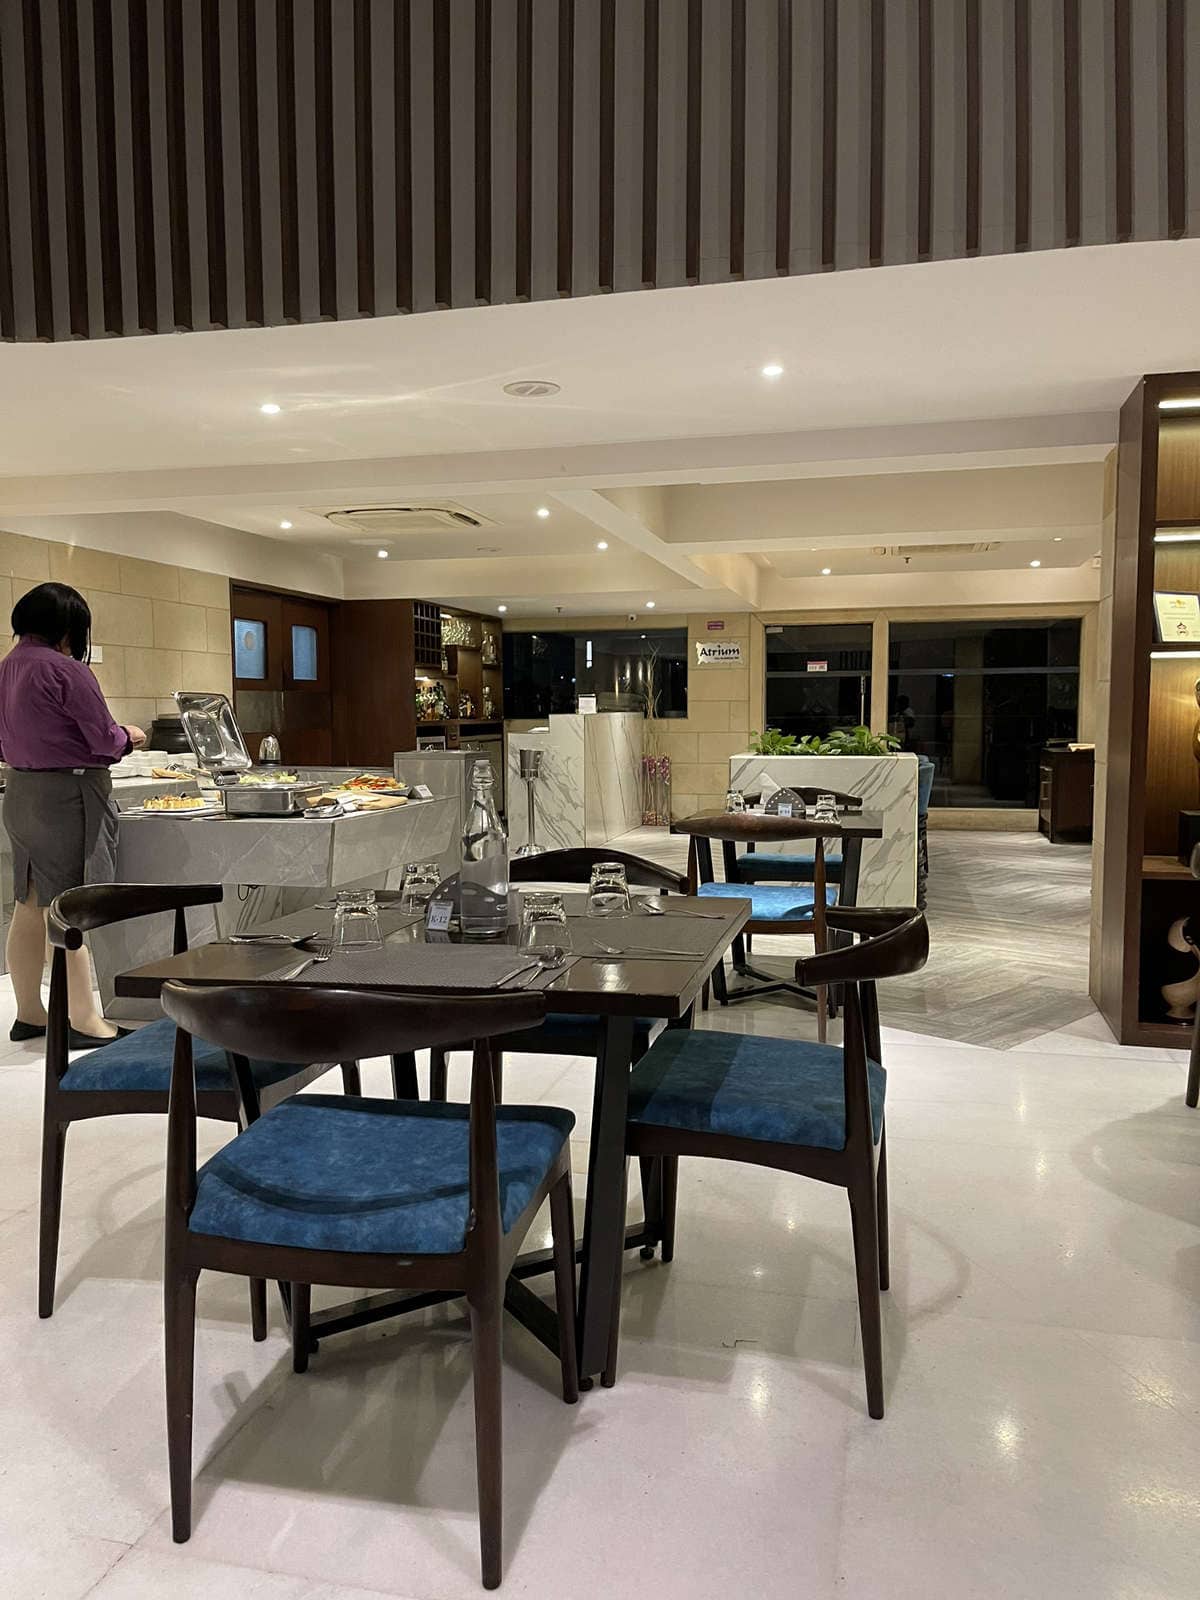 Royal Orchid Golden Suites in Pune, India - 100 reviews, price from $47 |  Planet of Hotels